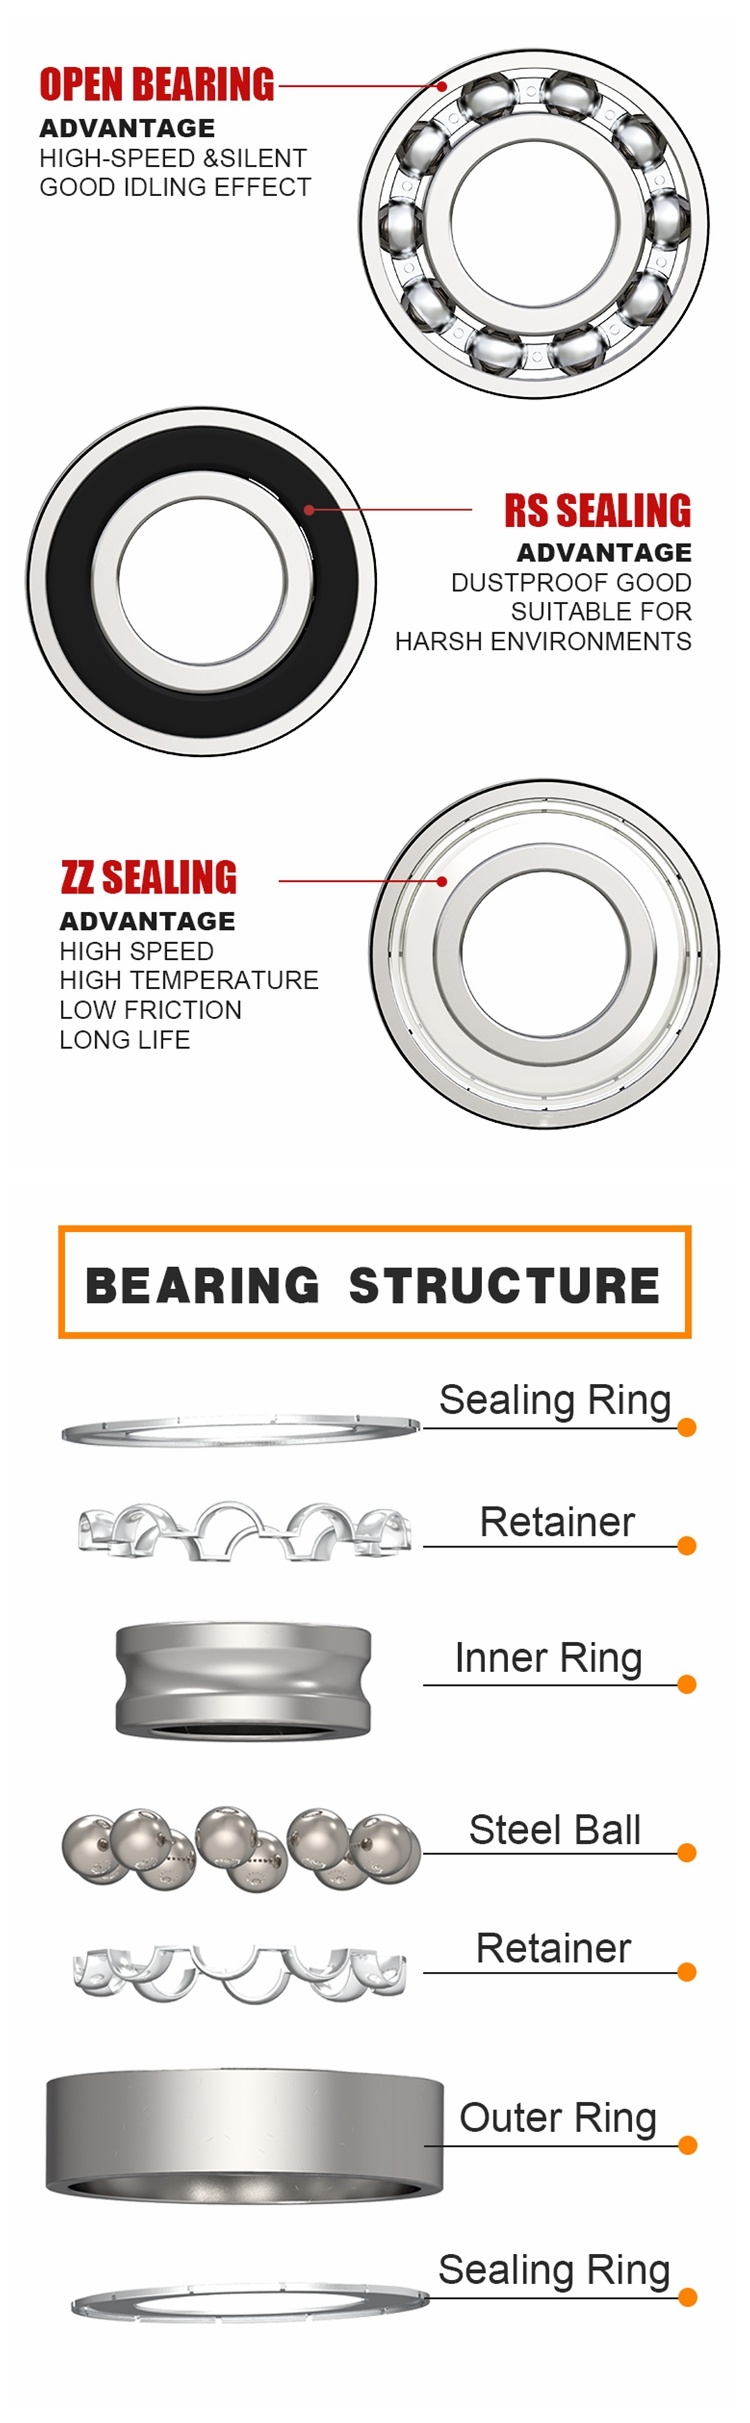 ABEC-3 Motorcycle Bearing Steel Cover 16022 Zz Ball Bearings